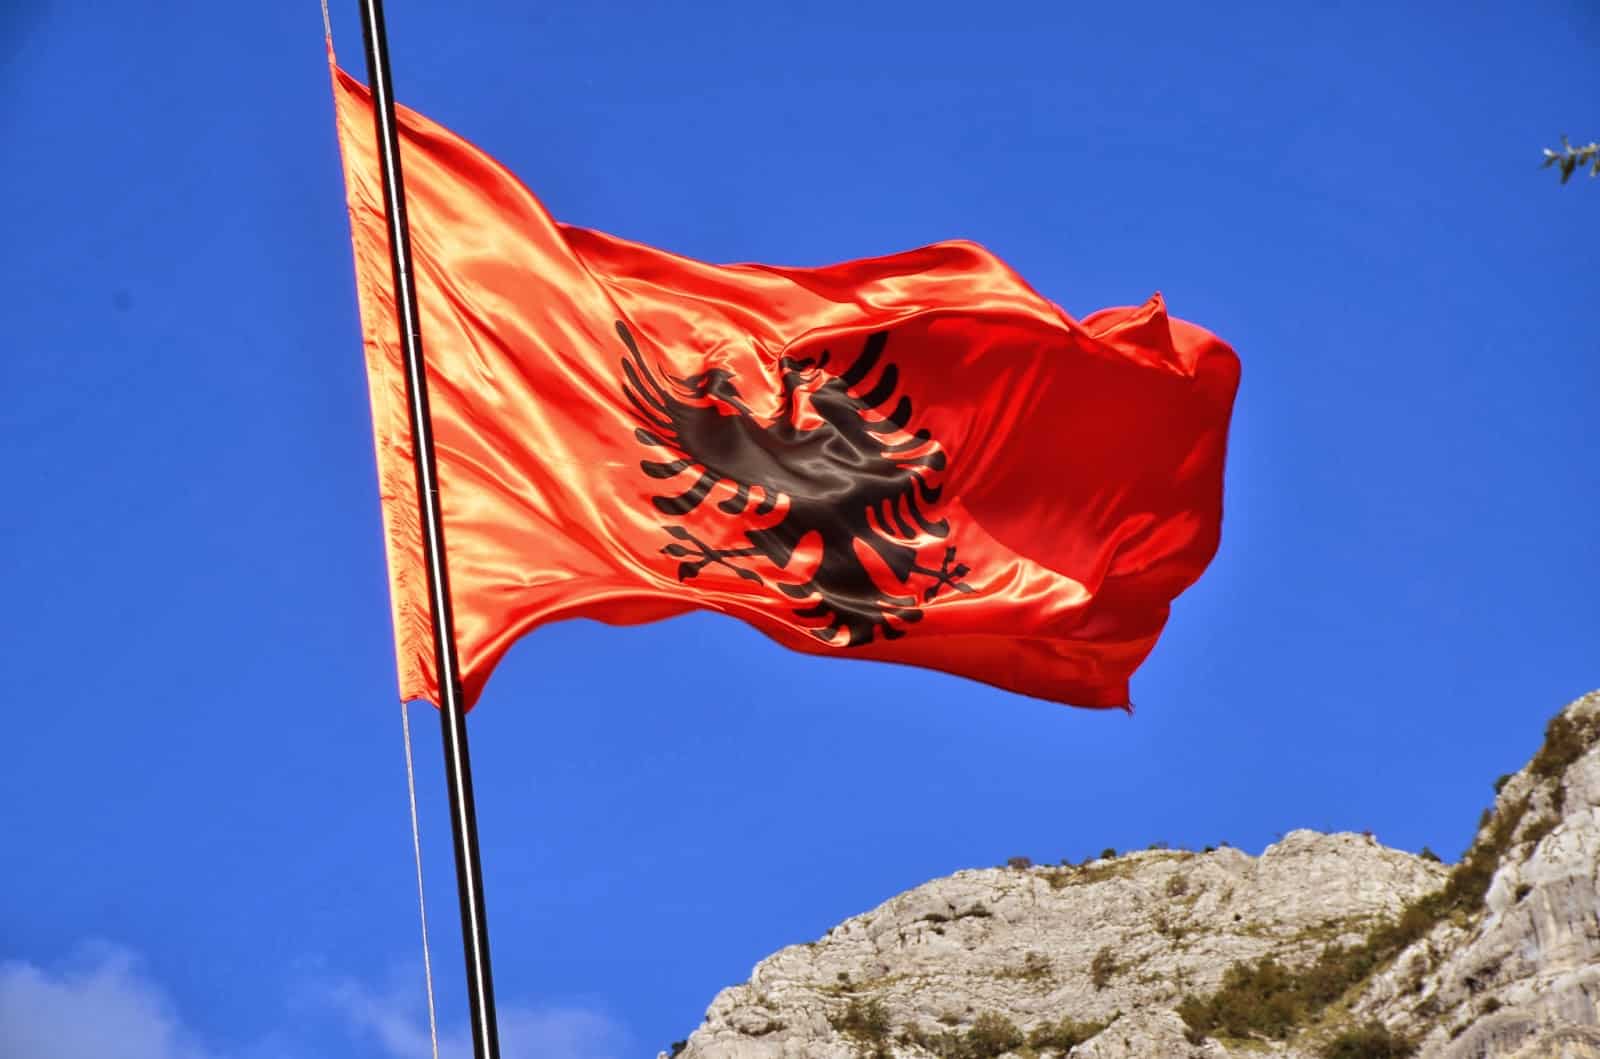 Small country, cool flag in Krujë, Albania